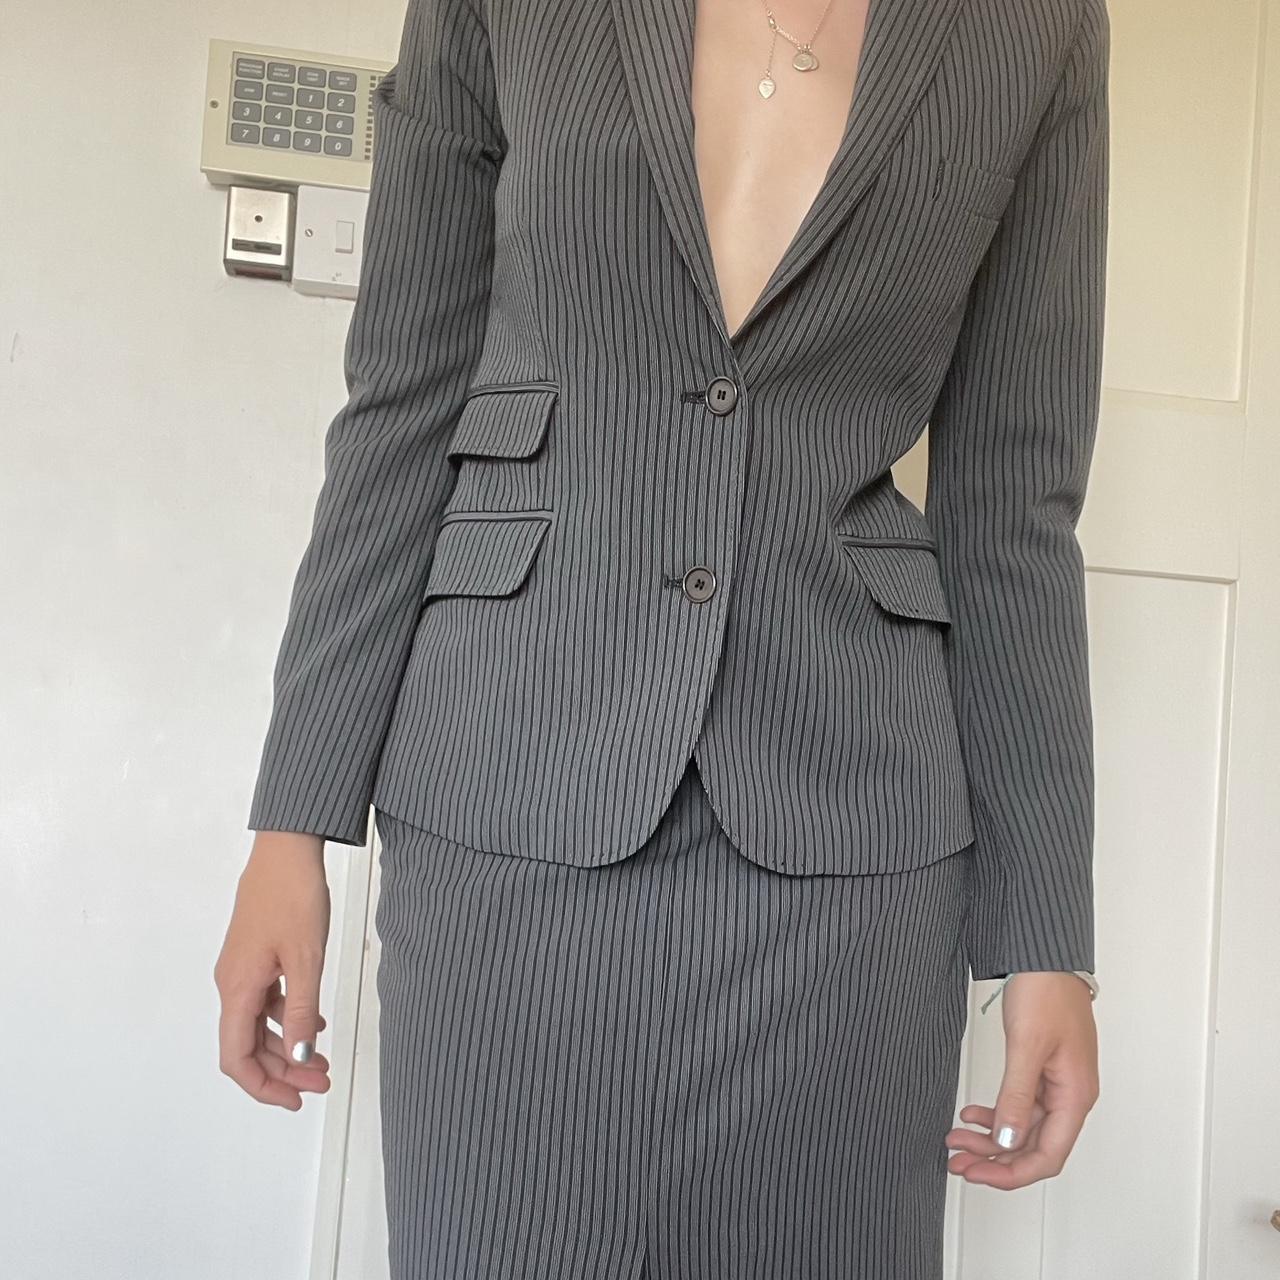 Reiss matching pinstriped suit Lovely set Size... - Depop